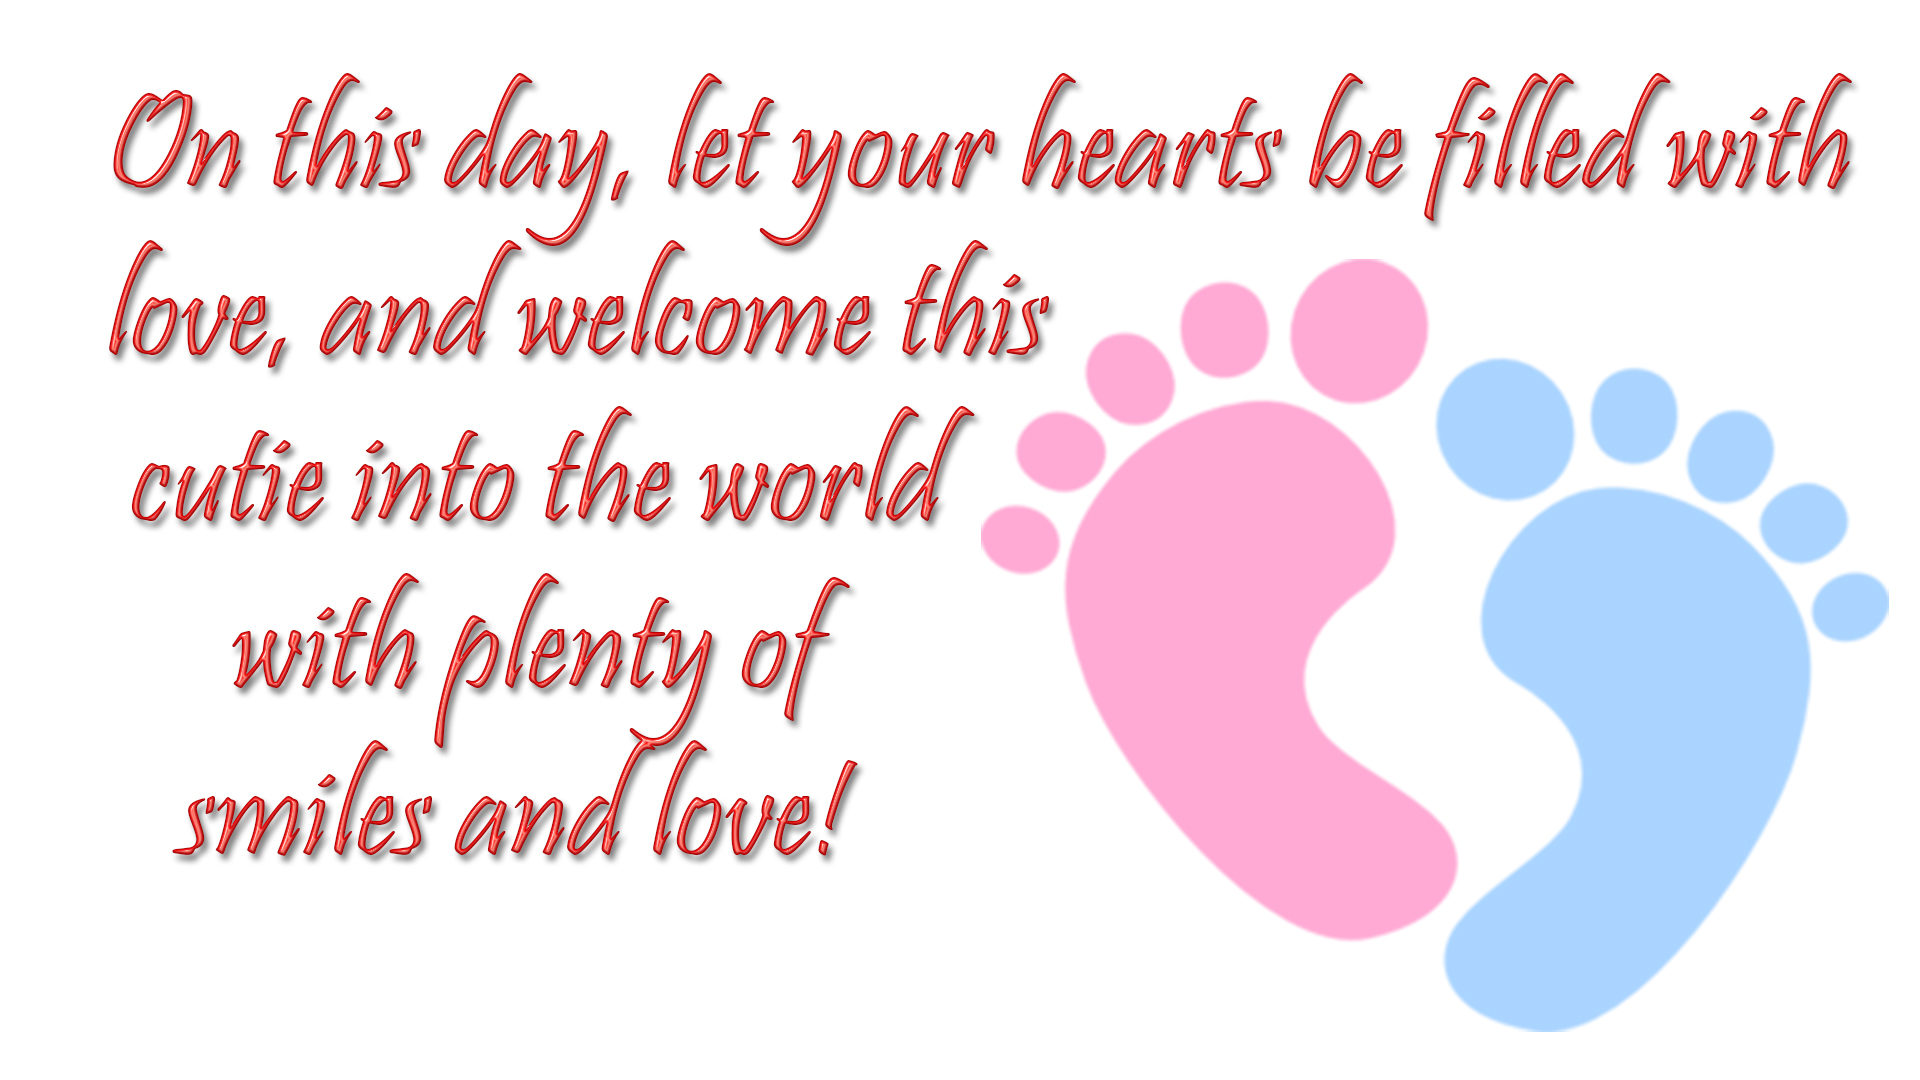 Baby Shower Wishes, Messages & Quotes Images